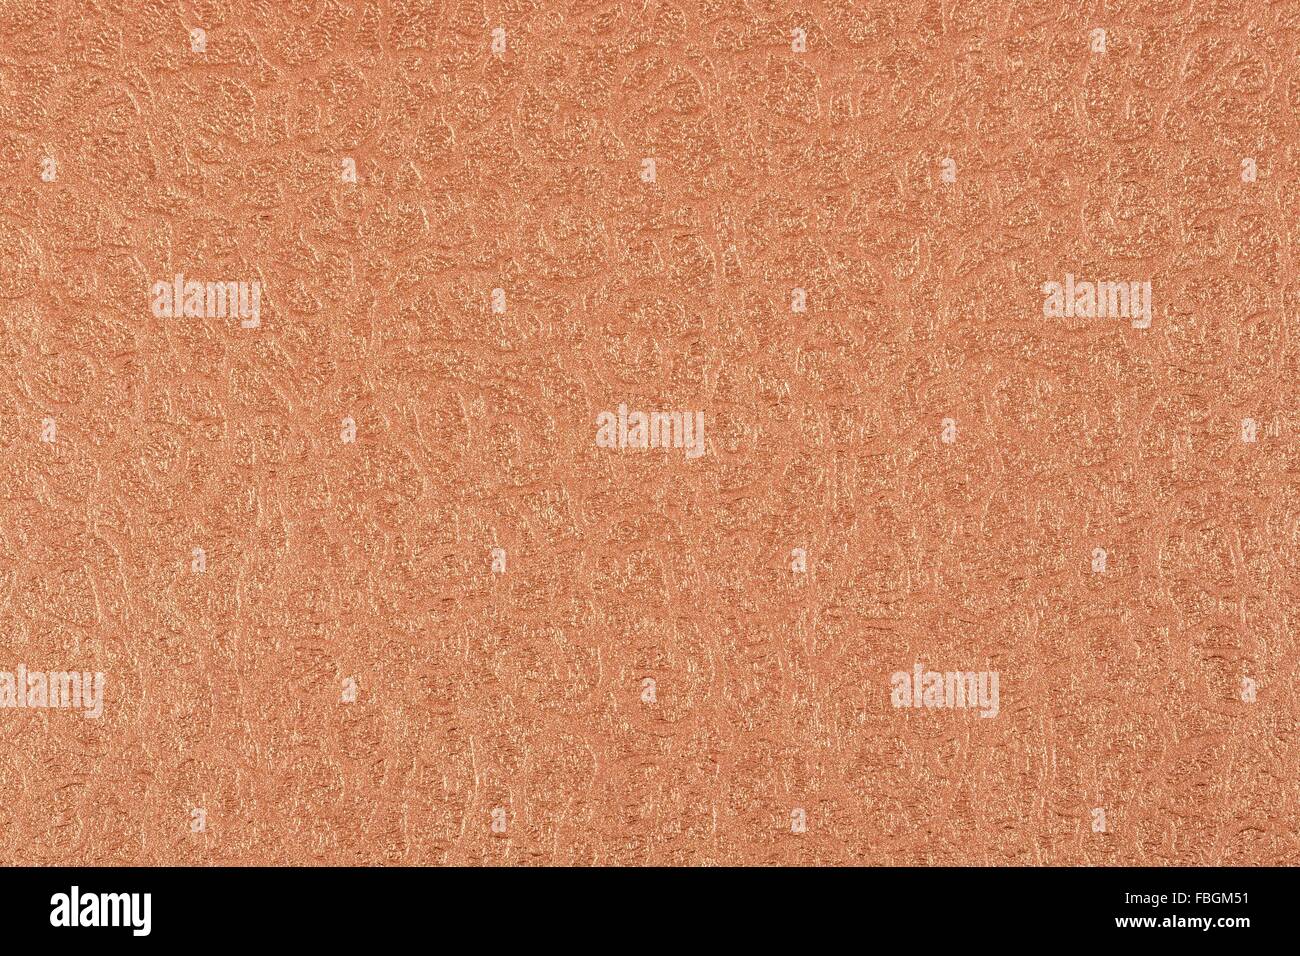 Beige material in geometric patterns, a background or texture Stock Photo